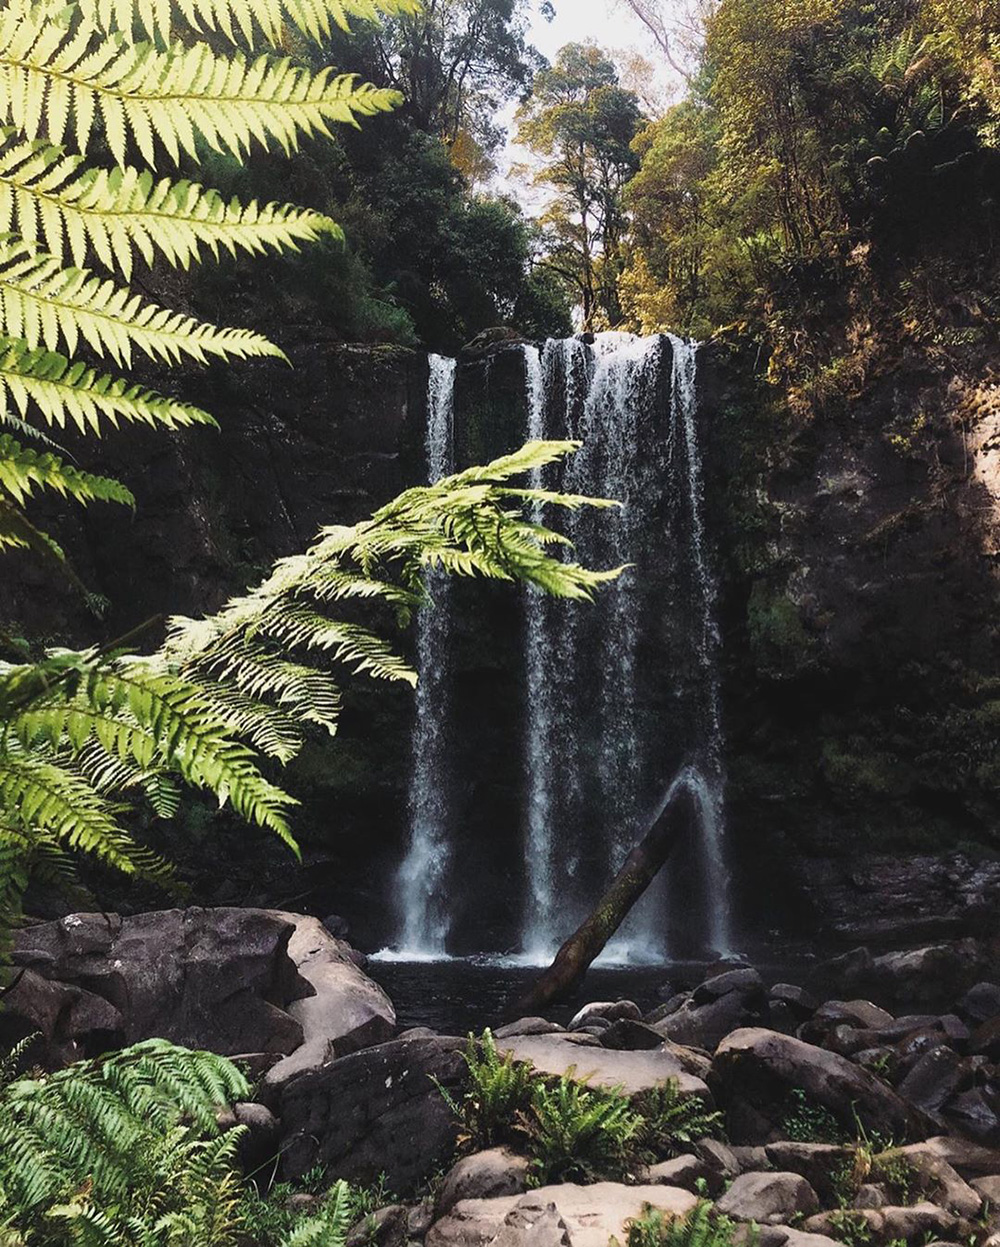  Located in the Great Otway National Park, the Hopetoun Falls plummet 30 metres into the Aire River.